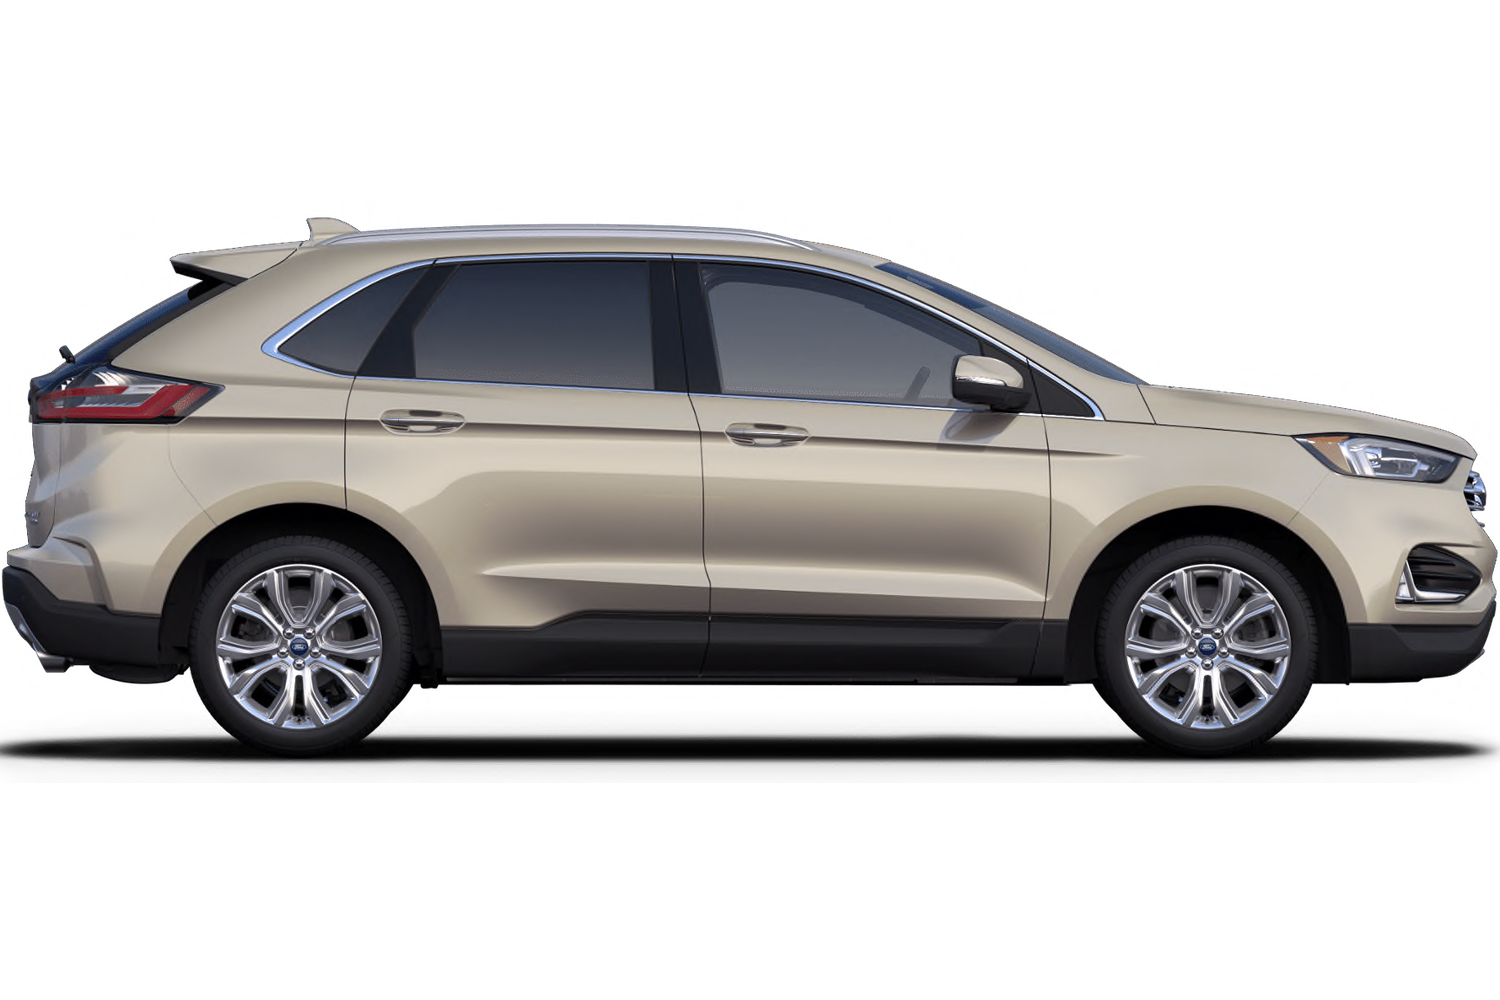 2020 Ford Edge Gets New Desert Gold Color: First Look